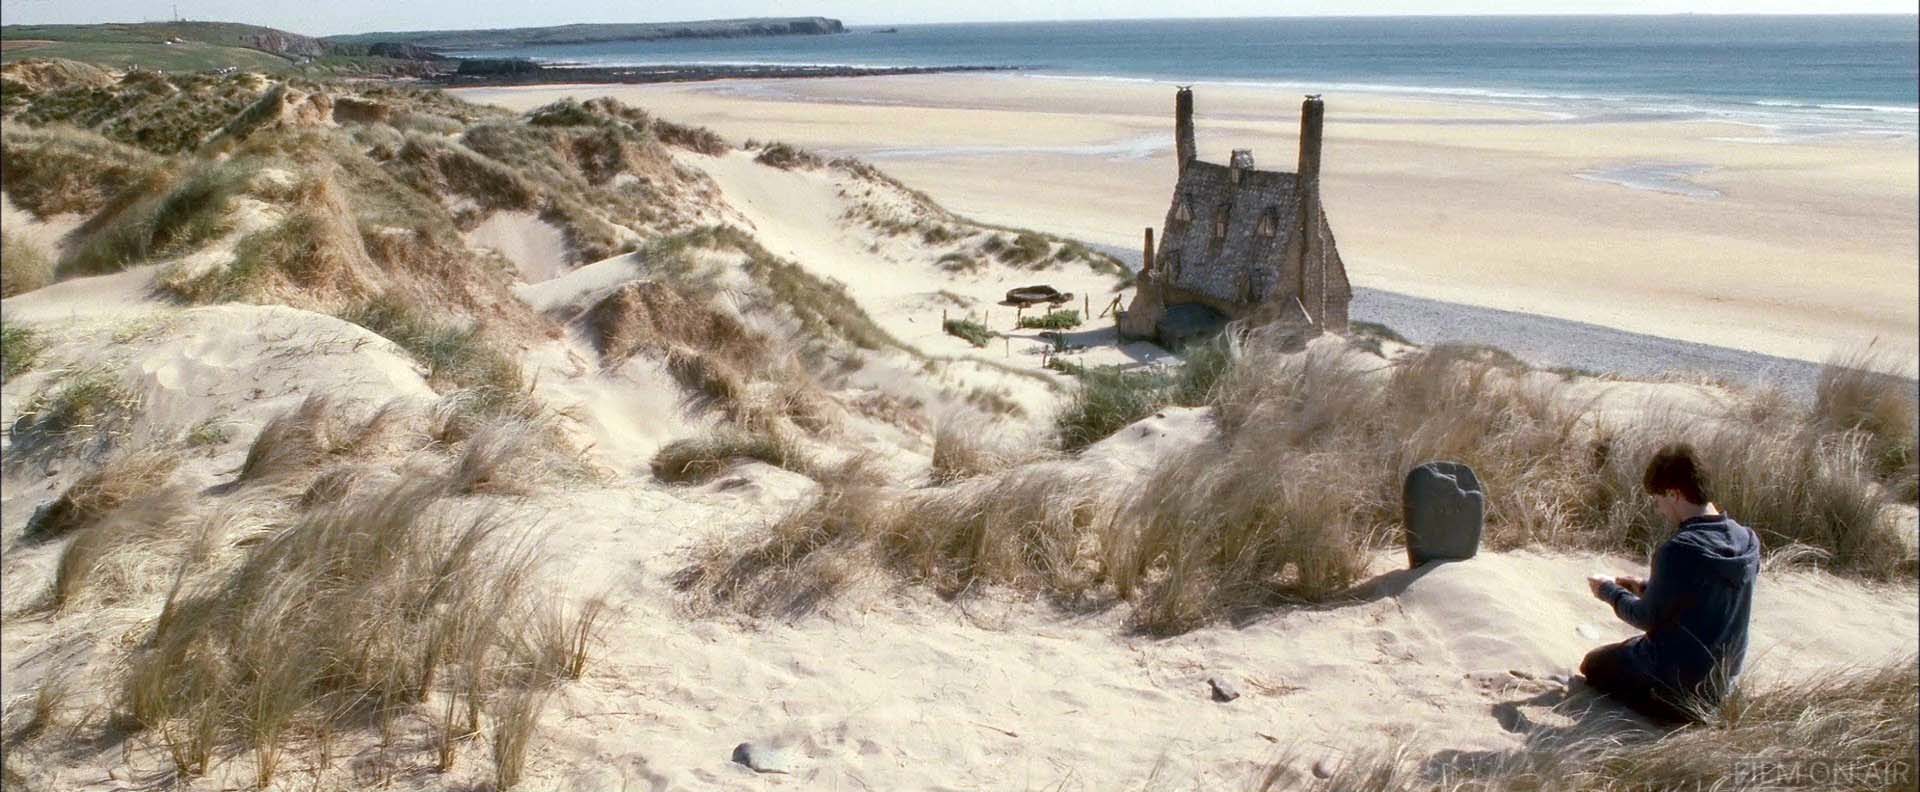 Harry Potter Beach
 in Harry Potter and the Deathly Hallows Part 2 in Harry Potter and the Deathly Hallows Part 2